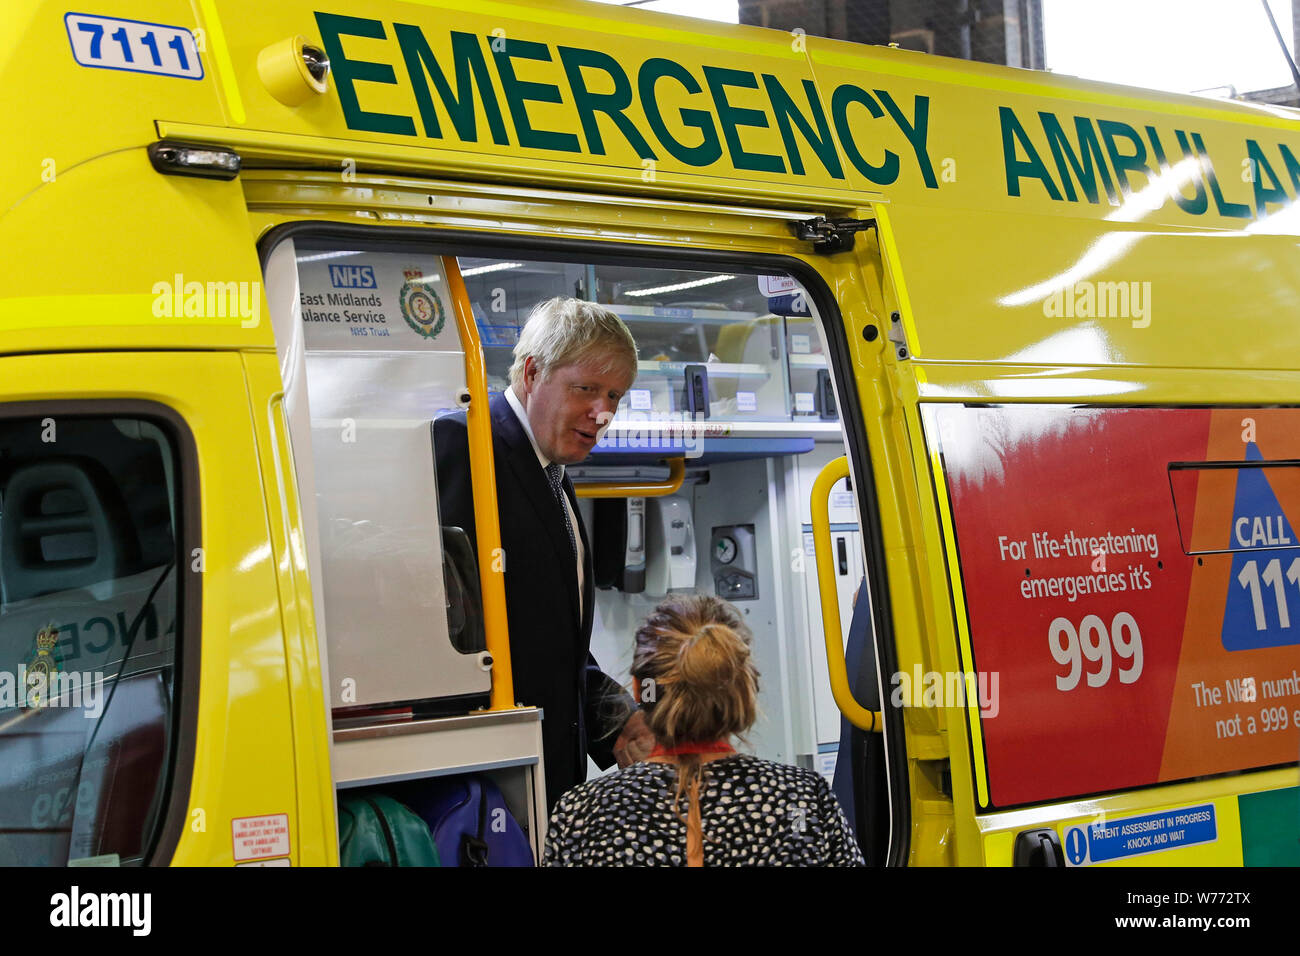 Prime Minister Boris Johnson inspects an ambulance during a visit to Pilgrim Hospital in Boston, Lincolnshire, to announce the government's NHS spending pledge of 1.8 billion. Stock Photo